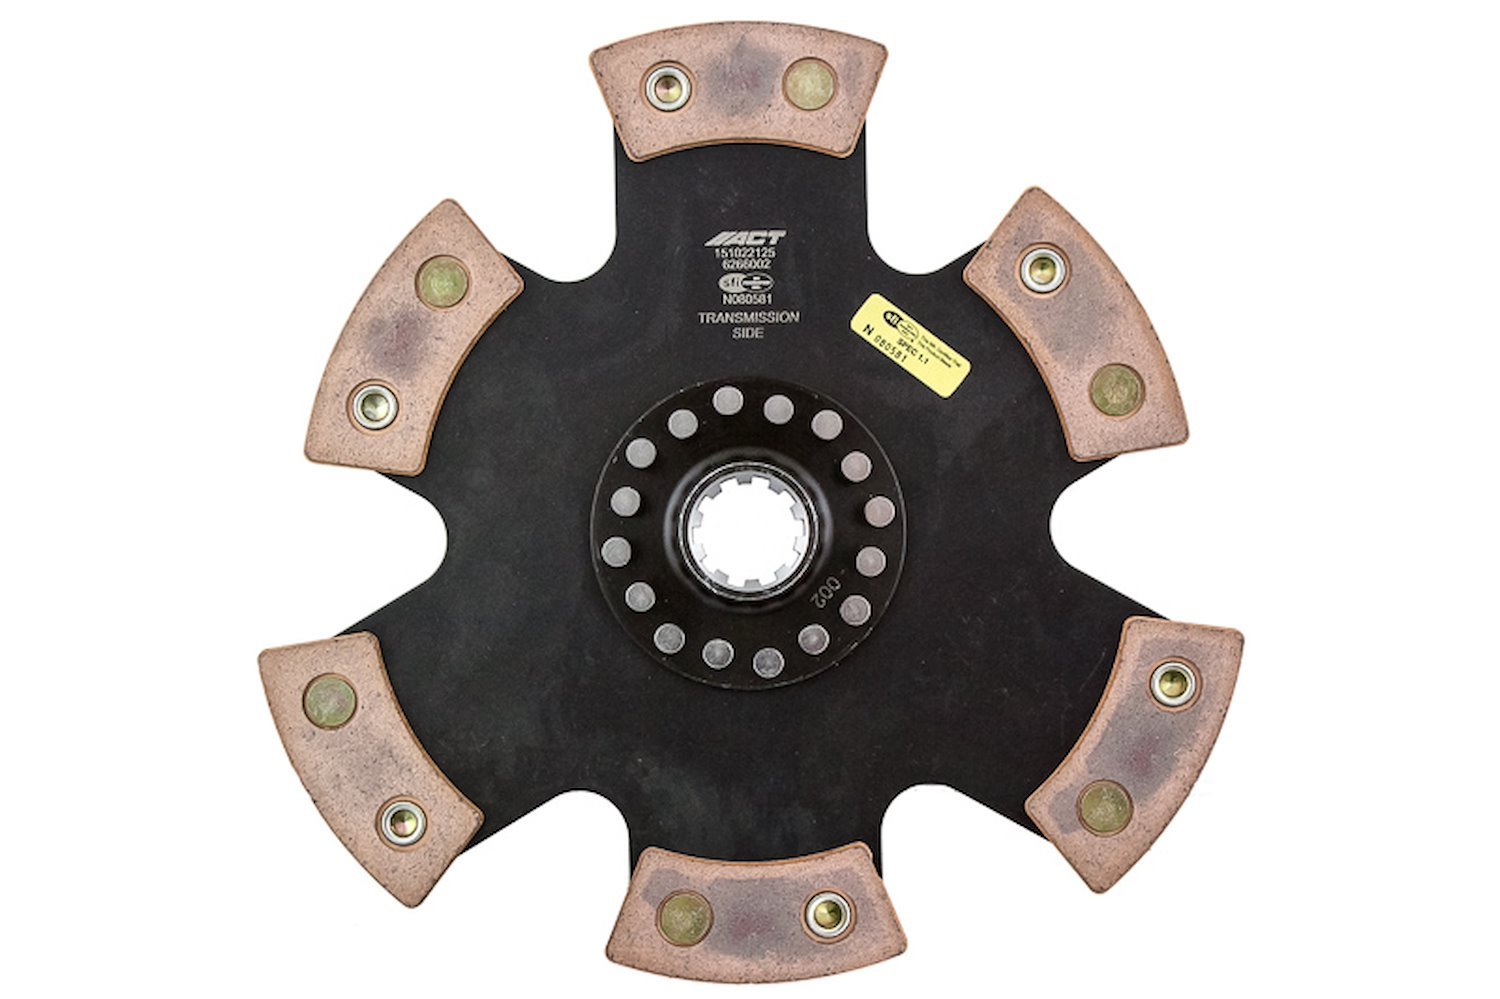 6-Pad Rigid Race Disc Transmission Clutch Friction Plate